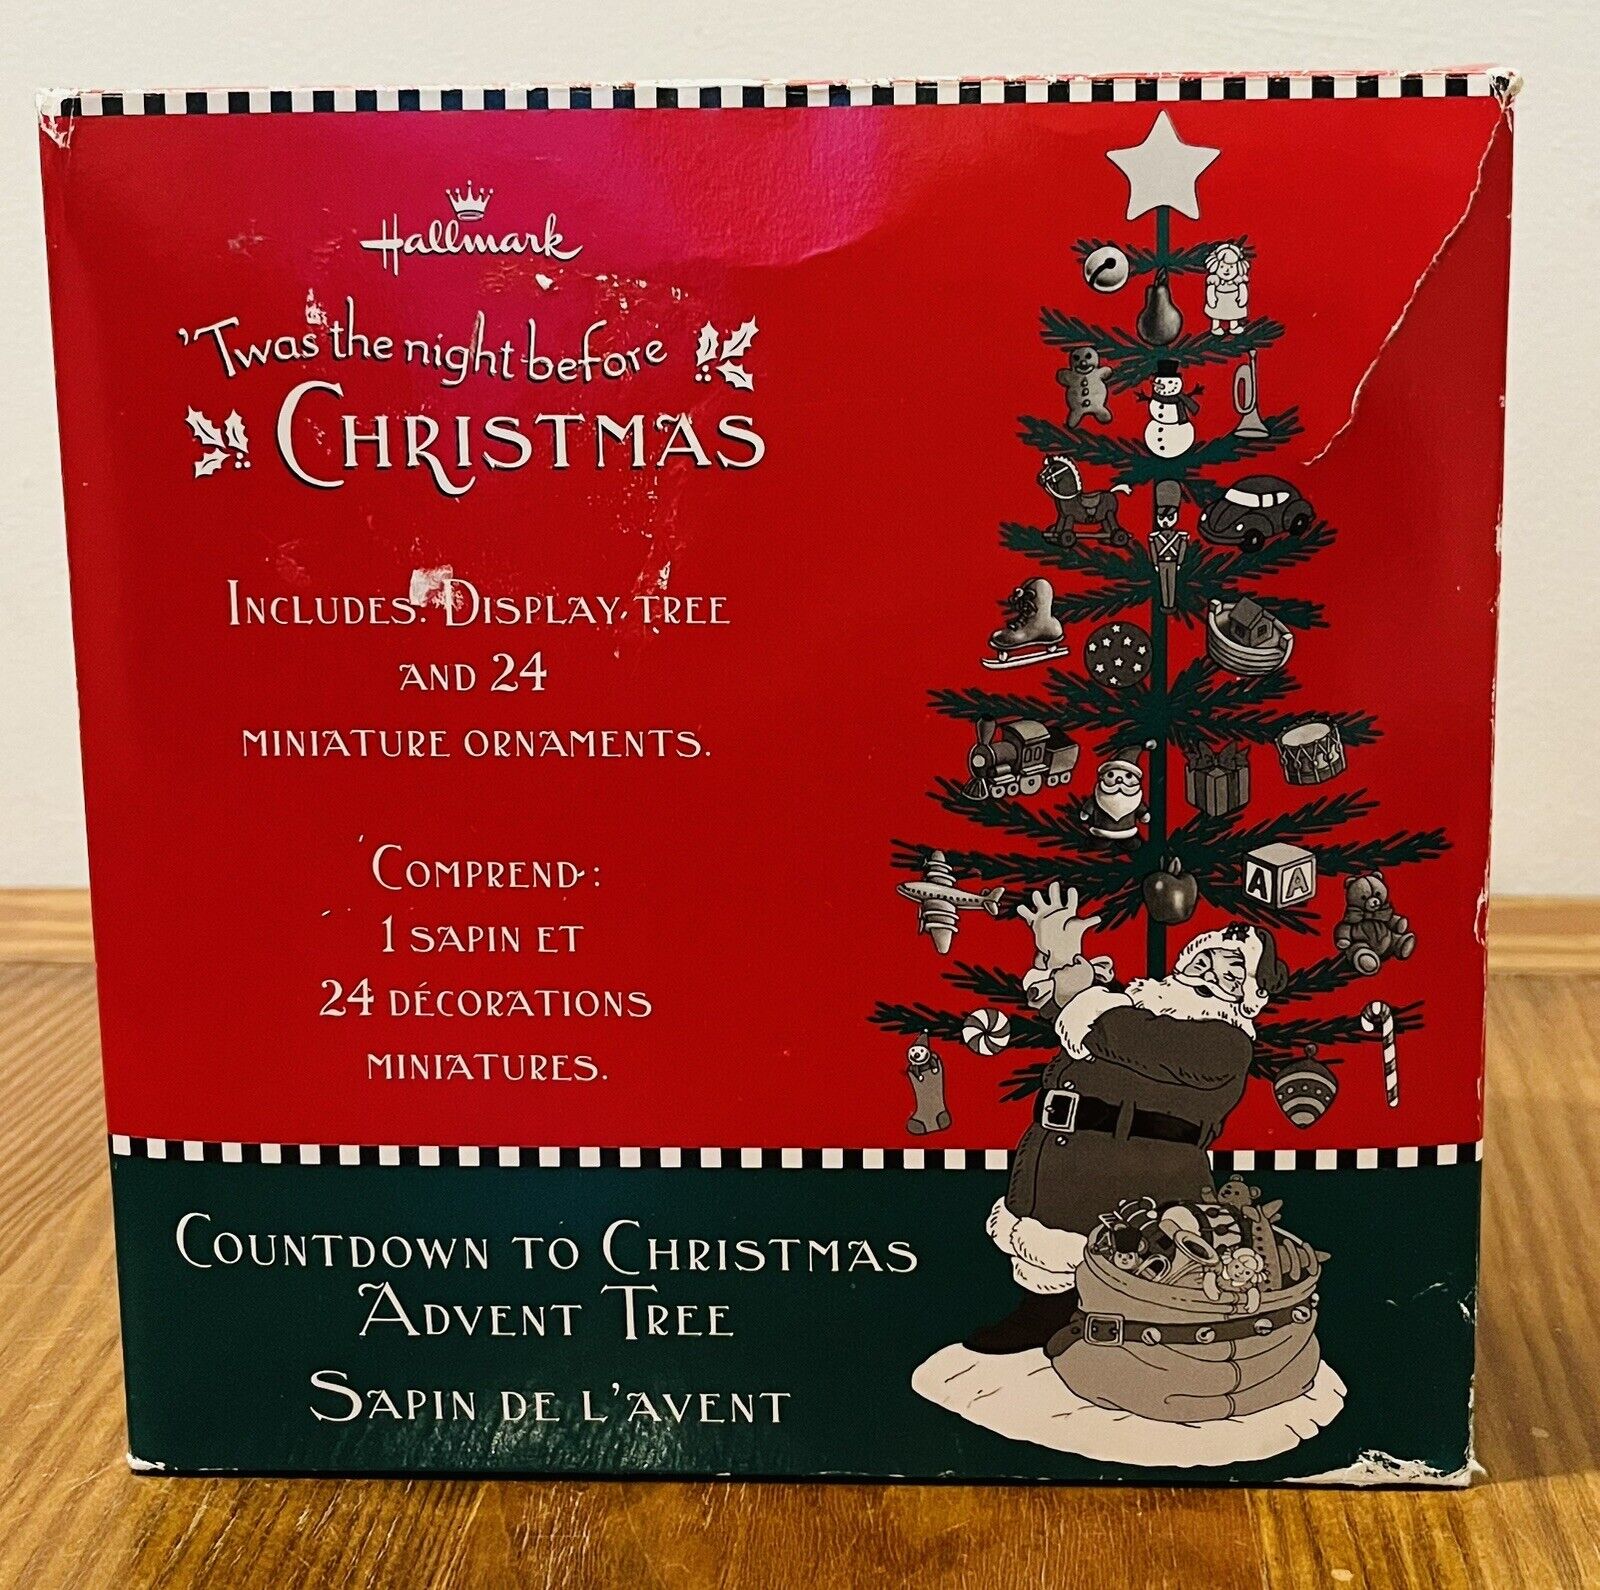 Hallmark Twas the Night Before Christmas Advent Tree With Ornaments Gift  NEW